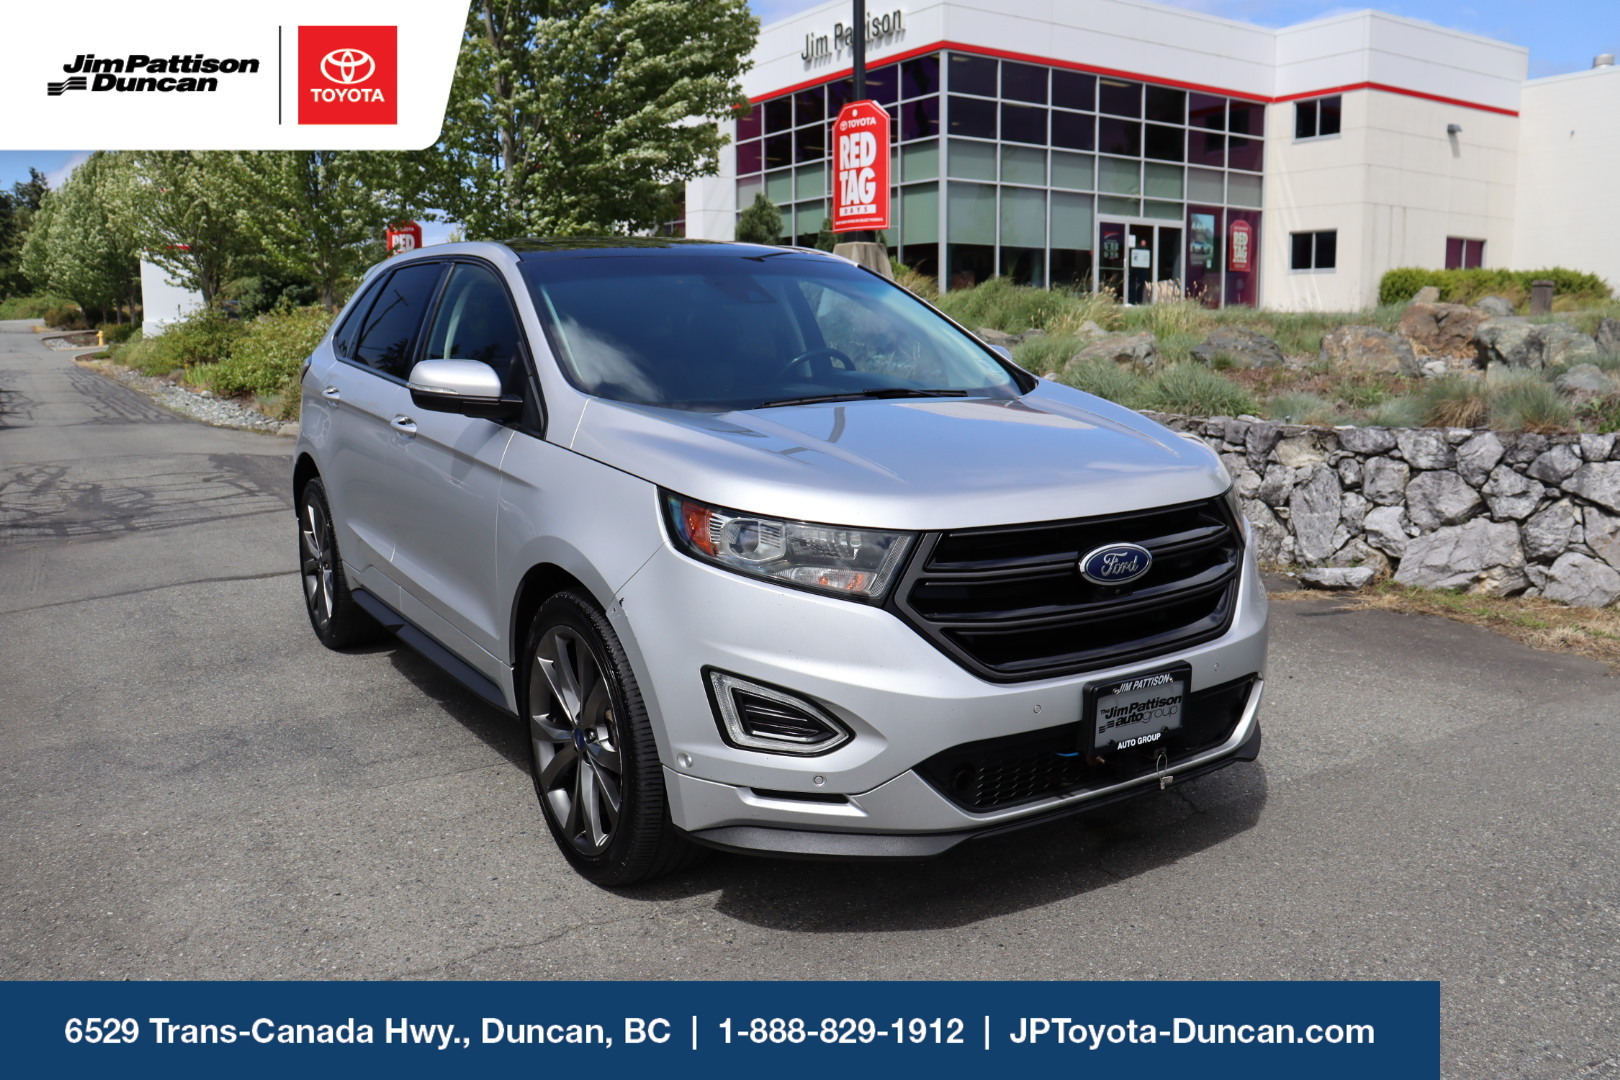 2017 Ford Edge 4dr Sport AWD | Tow Package | Panoramic Roof